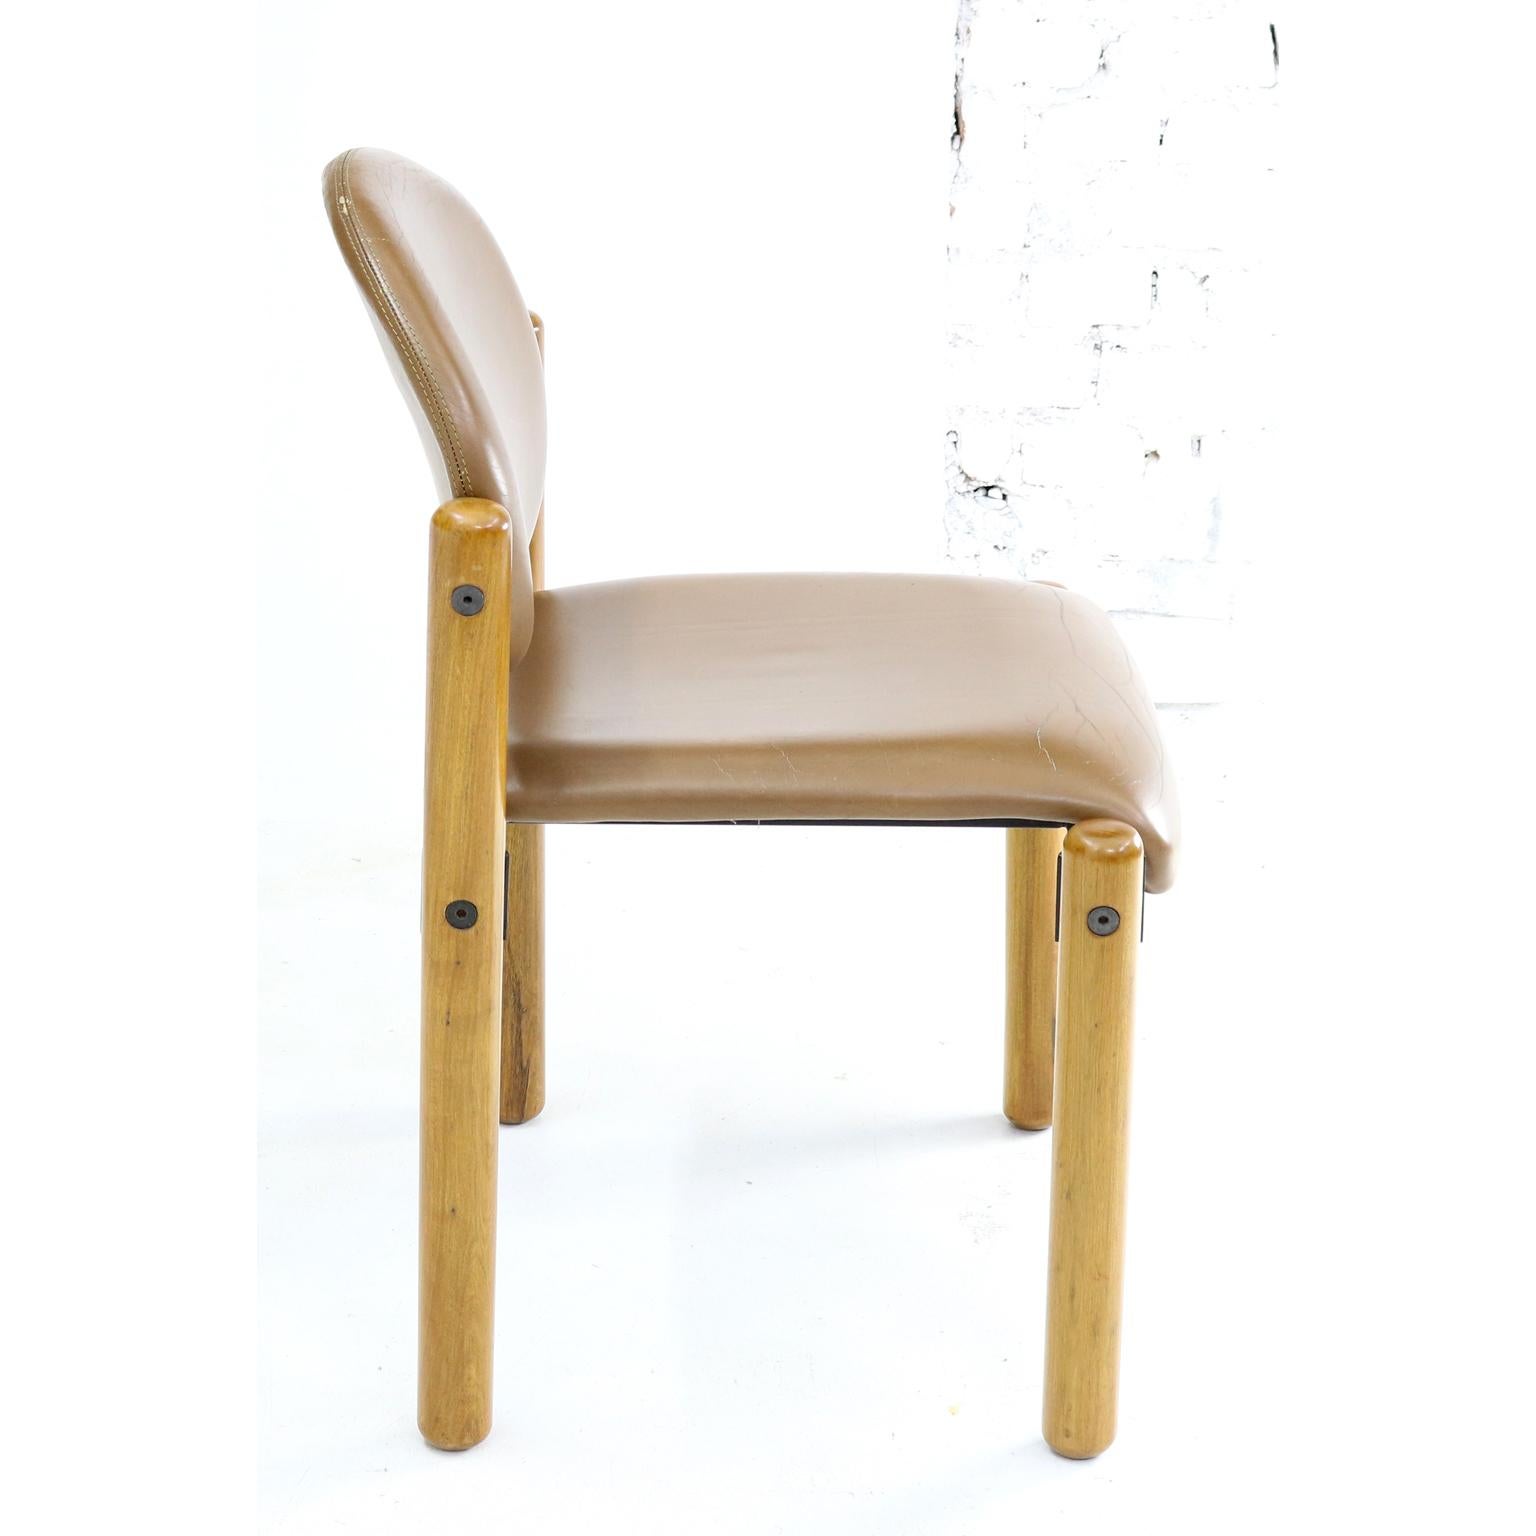 Brazilian midcentury chair designed by Sergio Rodrigues, 1980s.
Materials: freijo wood and synthetic leather.